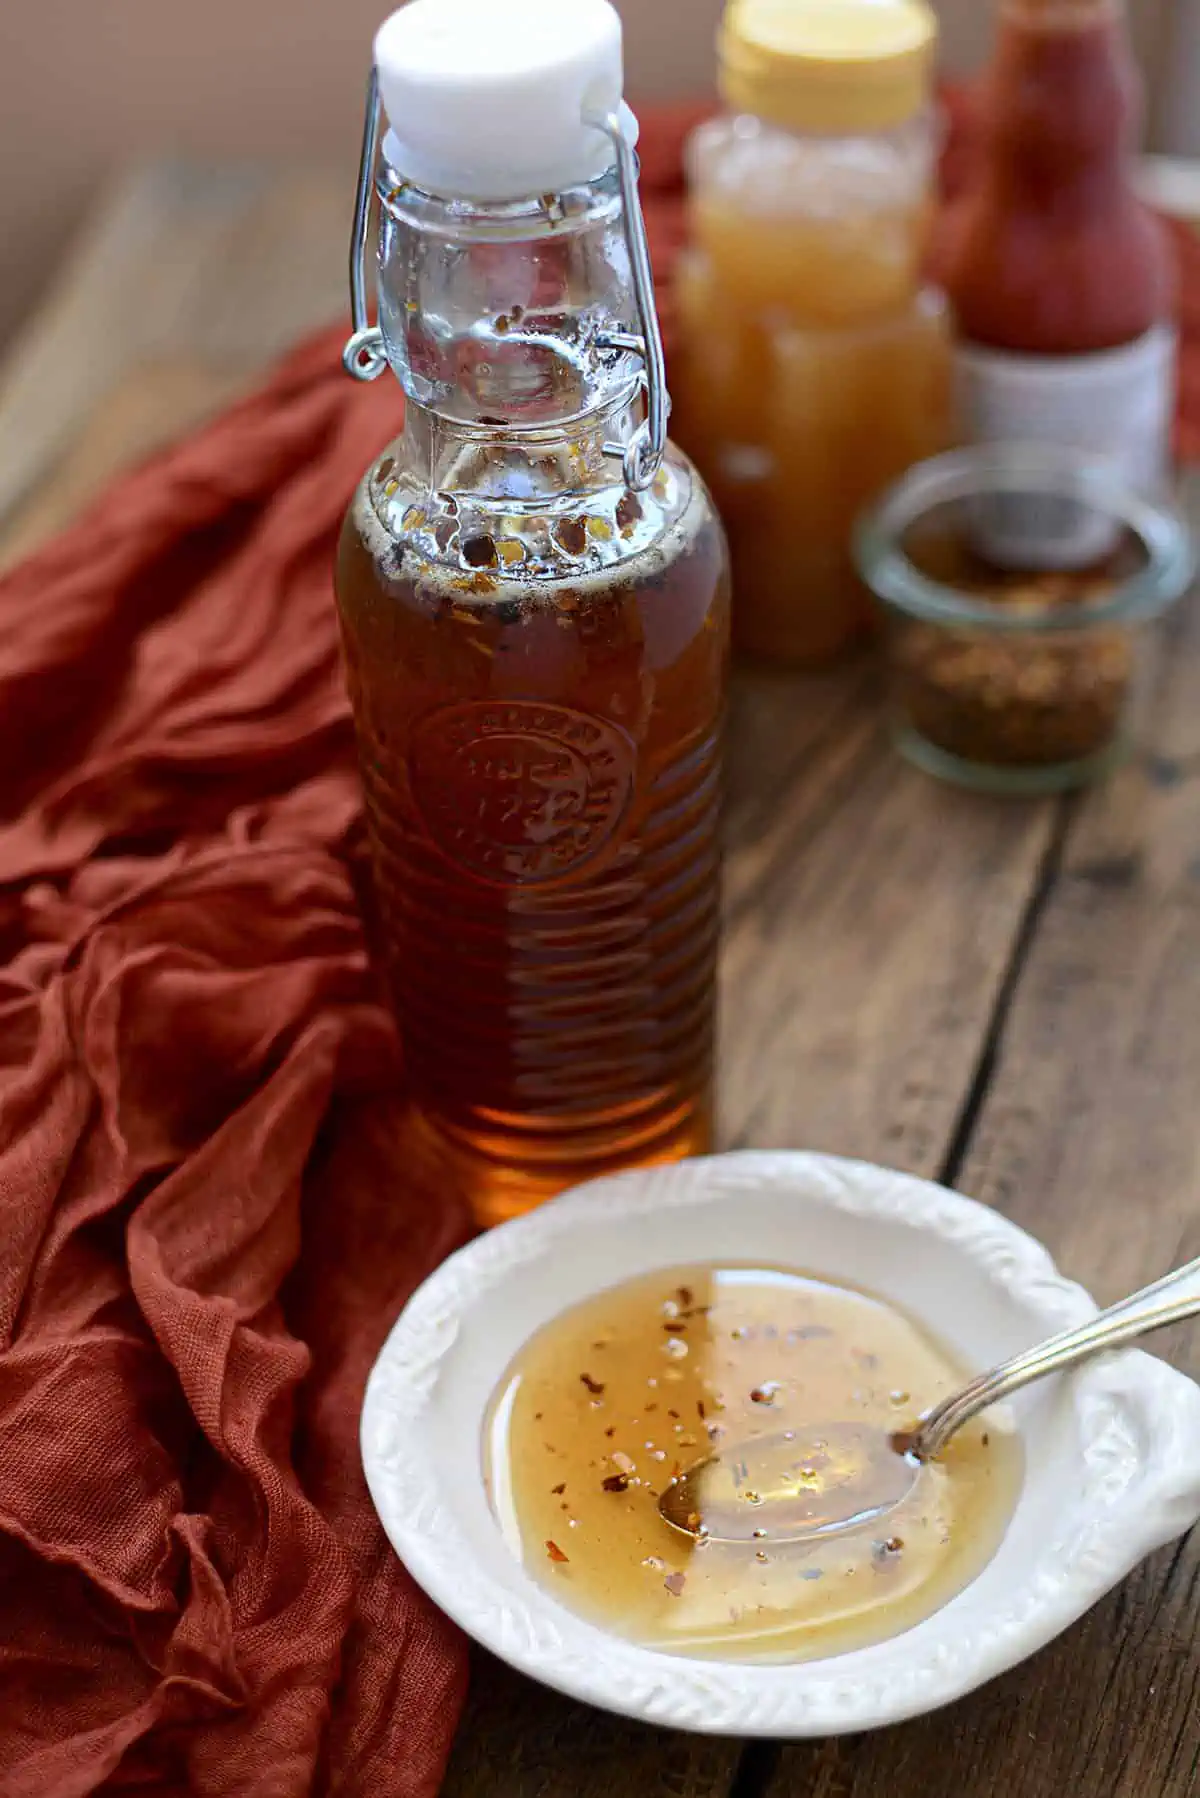 A small white bowl holds some hot honey with a larger bottle standing behind it.